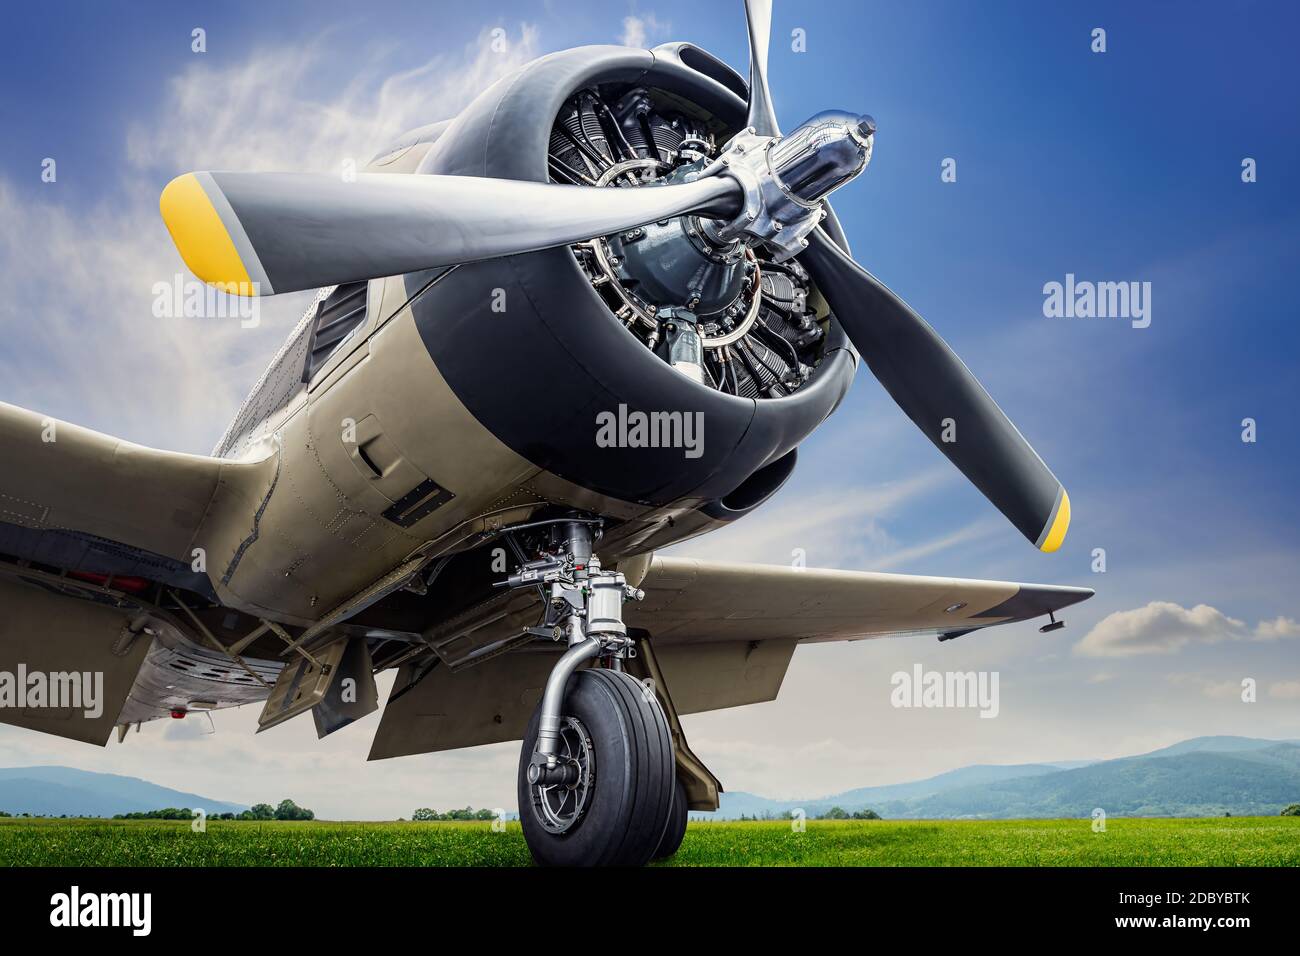 historical aircraft against a dramatic sky Stock Photo